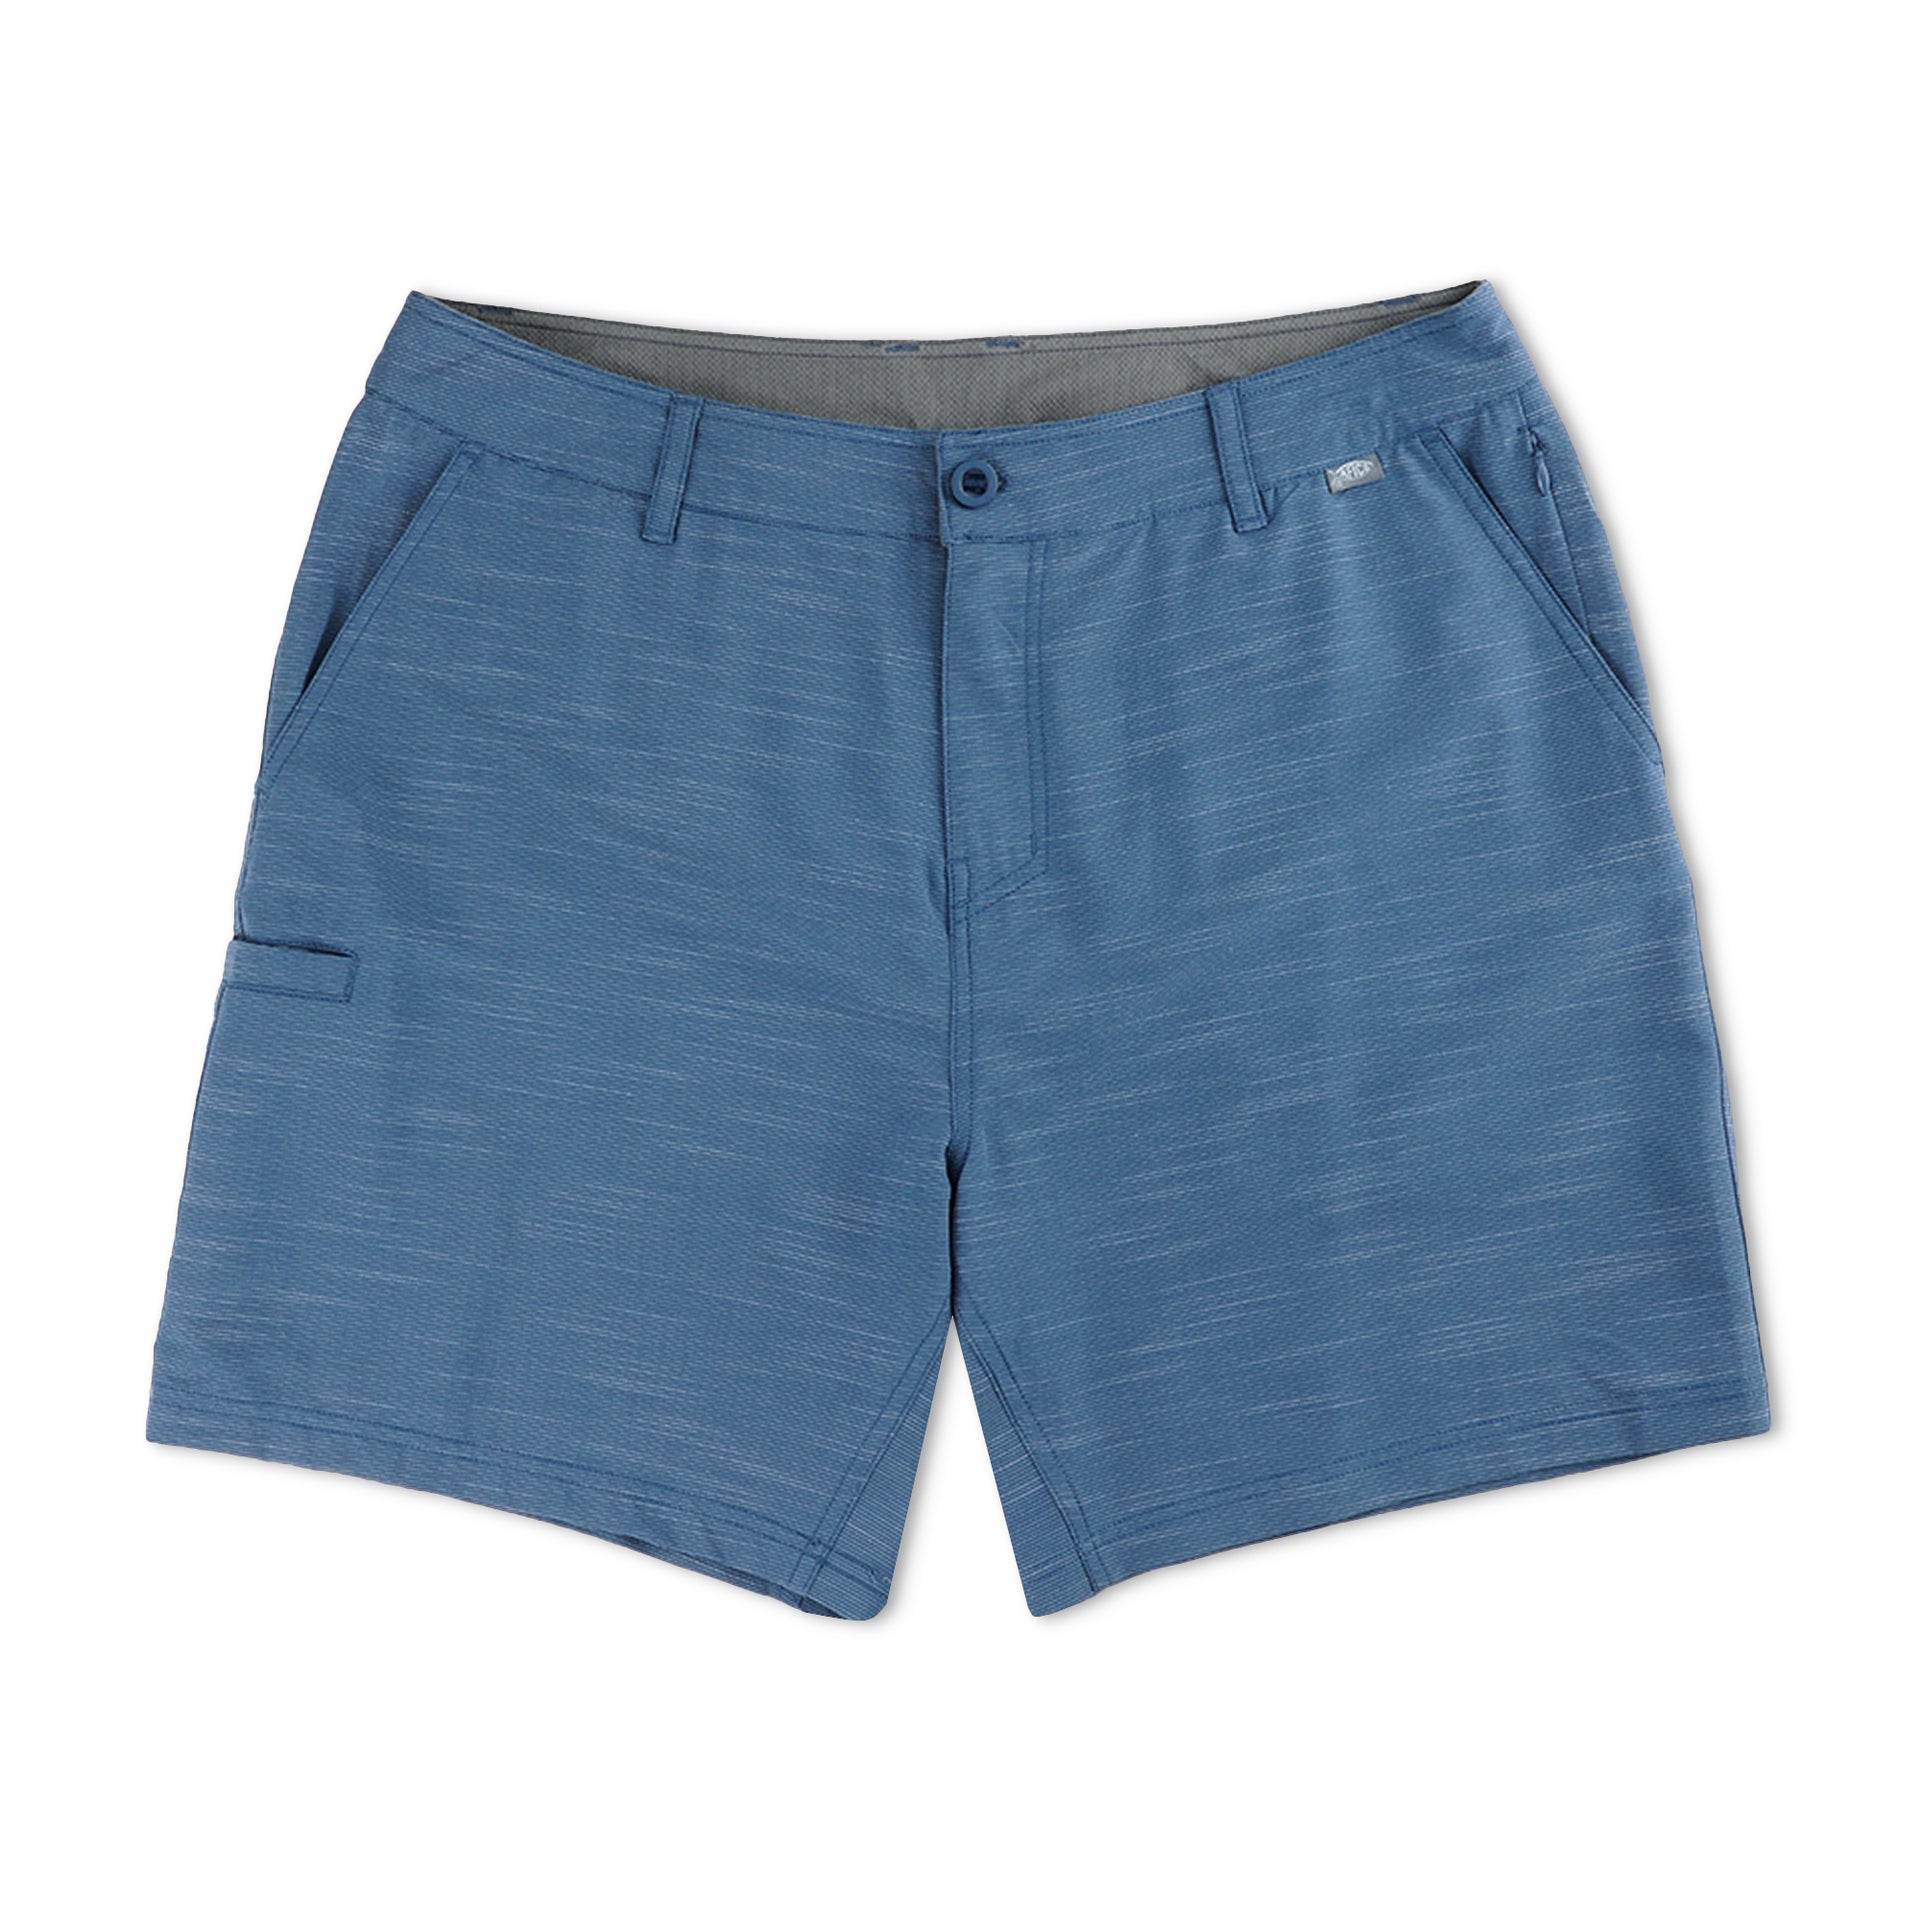 AFTCO 365 Hybrid Chino Shorts for Men - Bering Sea - 34